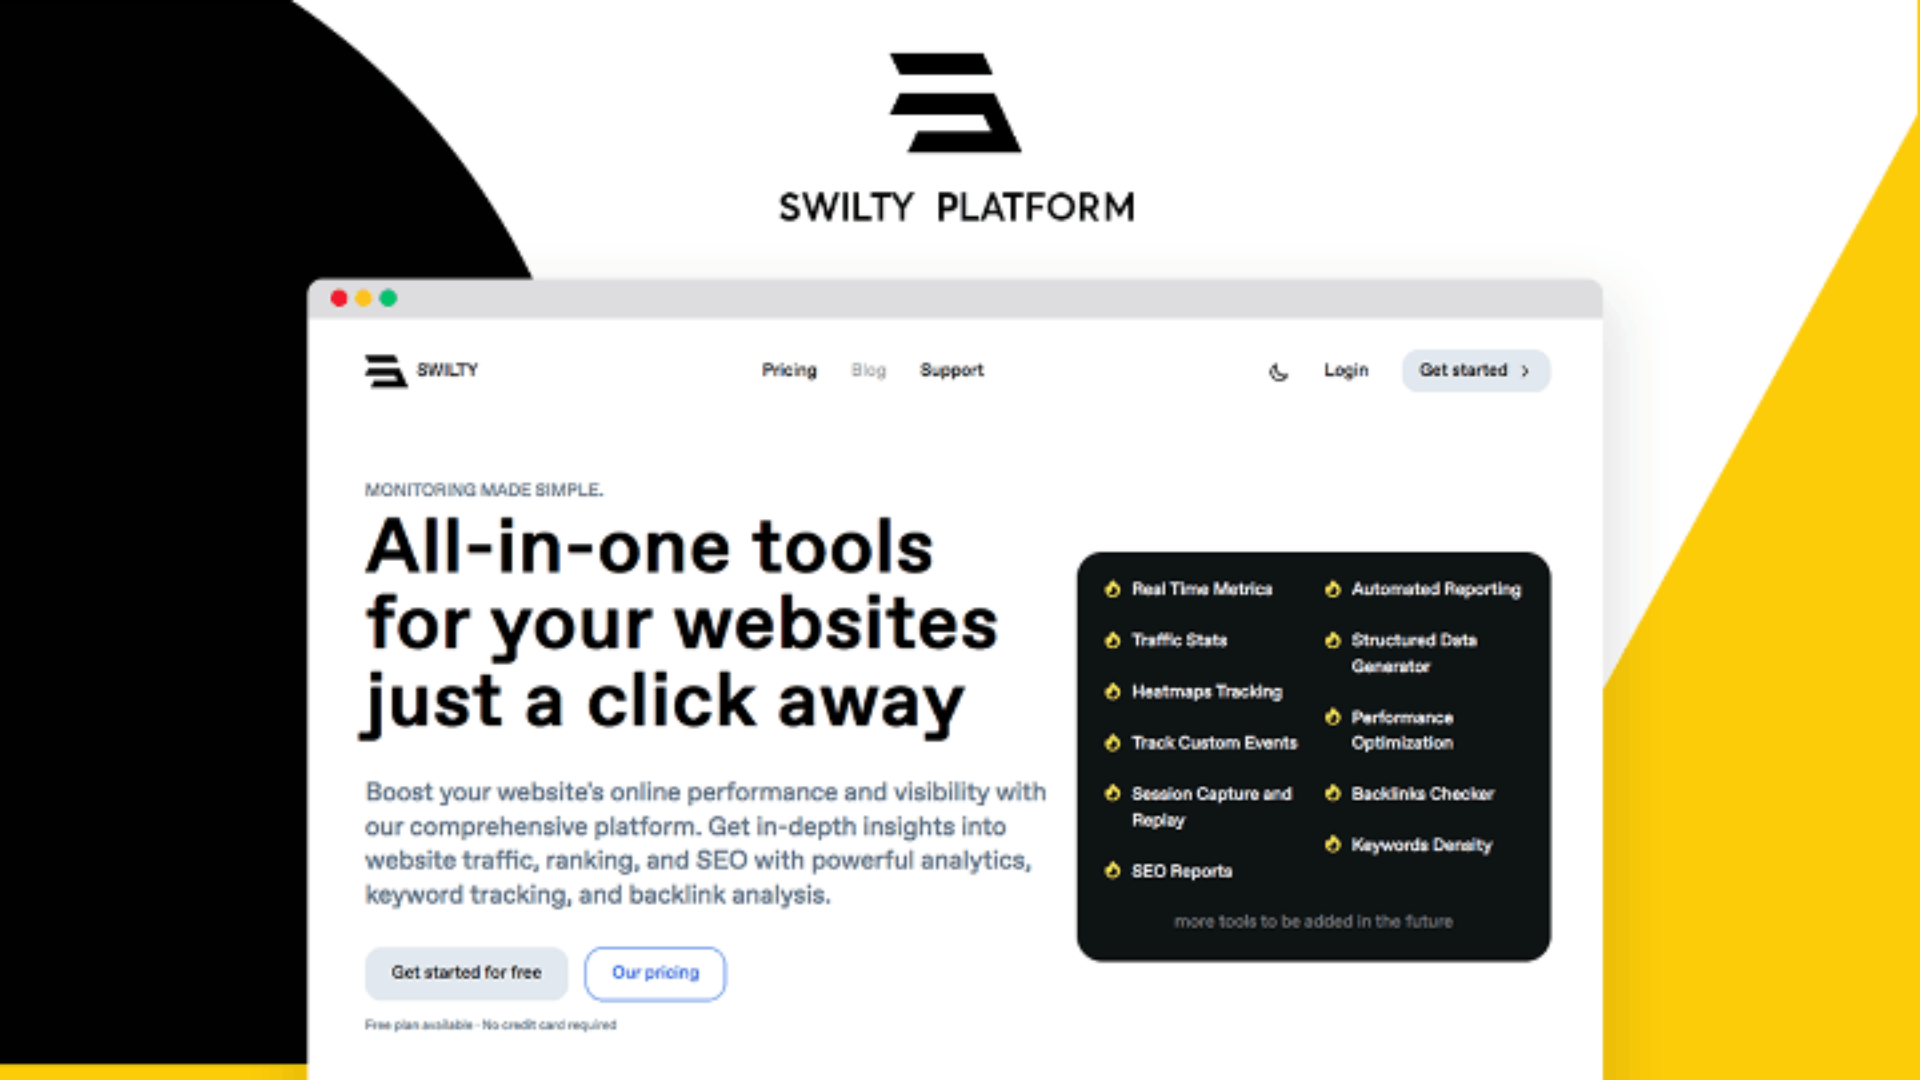 Lifetime Deal to Swilty Platform – All-in-one tools: Essential for $48